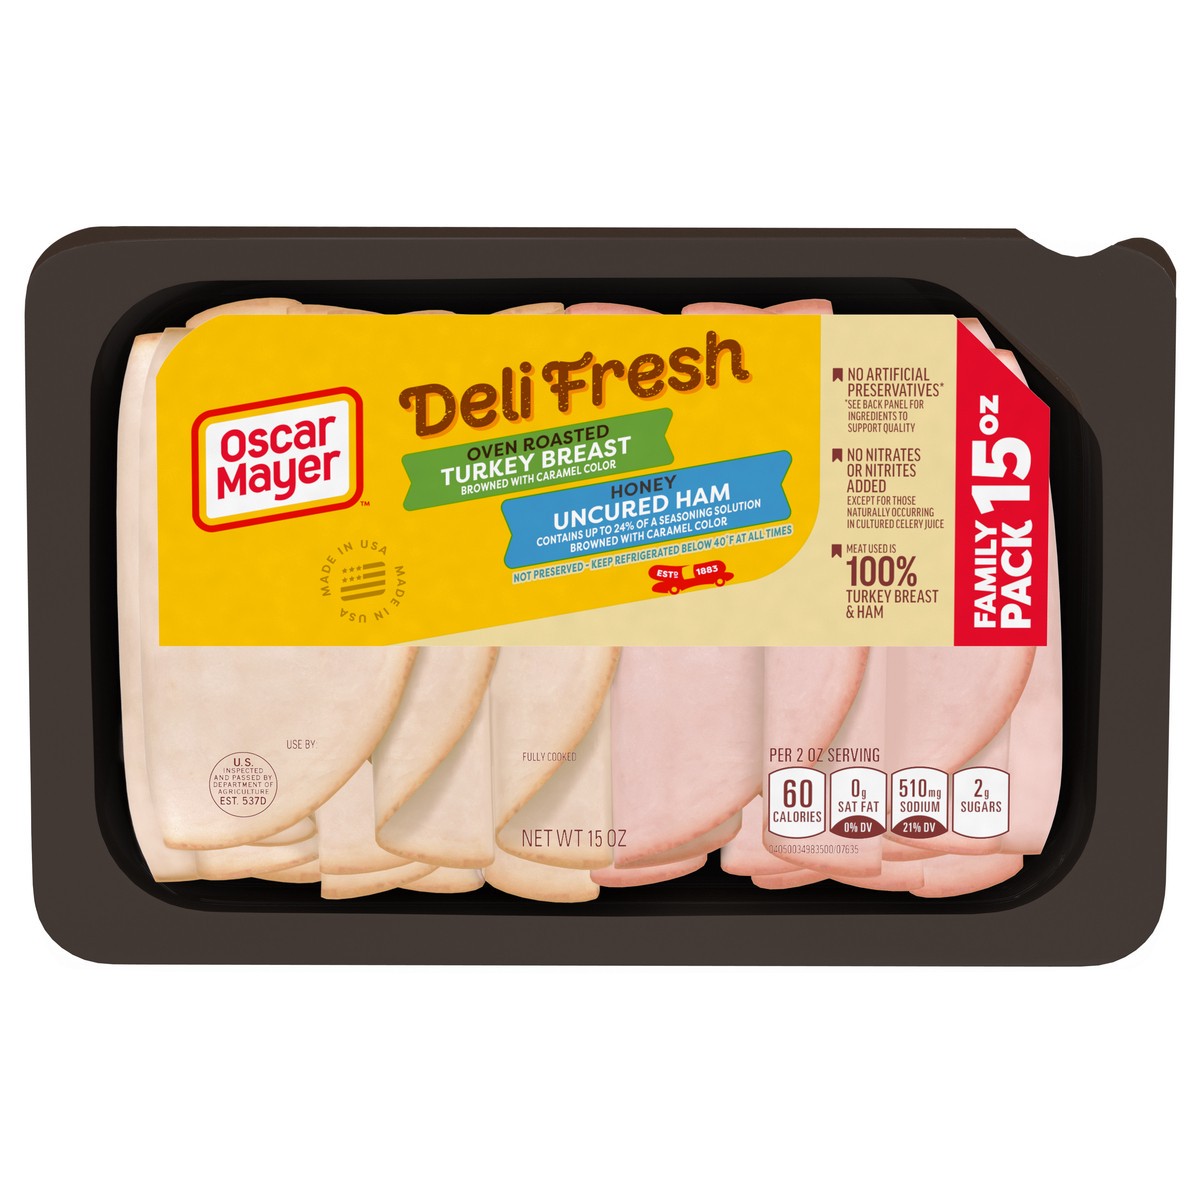 slide 1 of 9, Oscar Mayer Deli Fresh Oven Roasted Turkey Breast & Honey Uncured Ham Sliced Lunch Meat Variety Pack, 15 oz. Family Size Tray, 15 oz